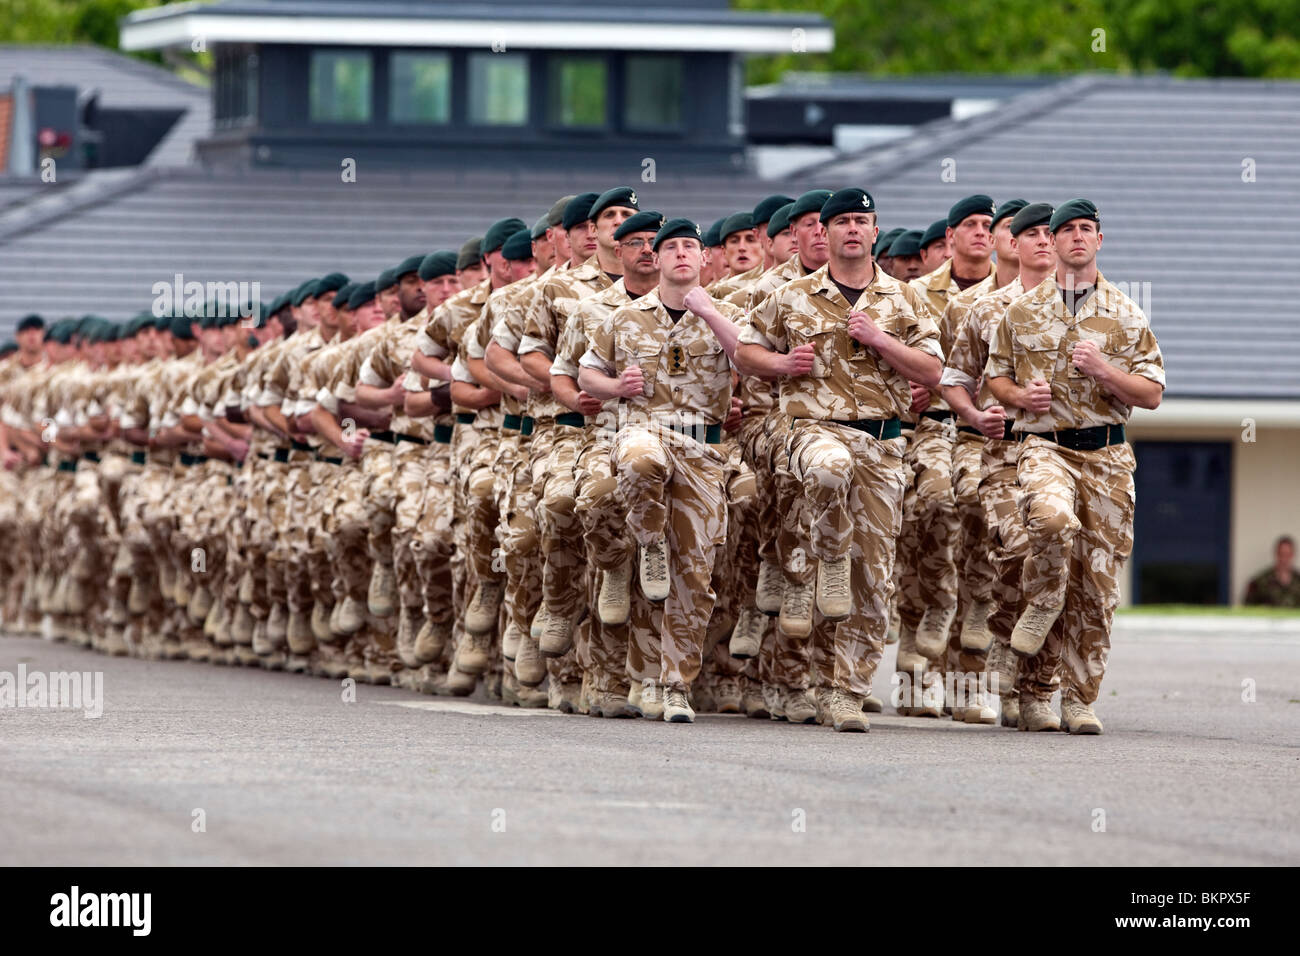 The British Armies 4th Battalion The Rifles on parade at Bulford Camp's Kiwi Barracks parade ground in desert kit Stock Photo